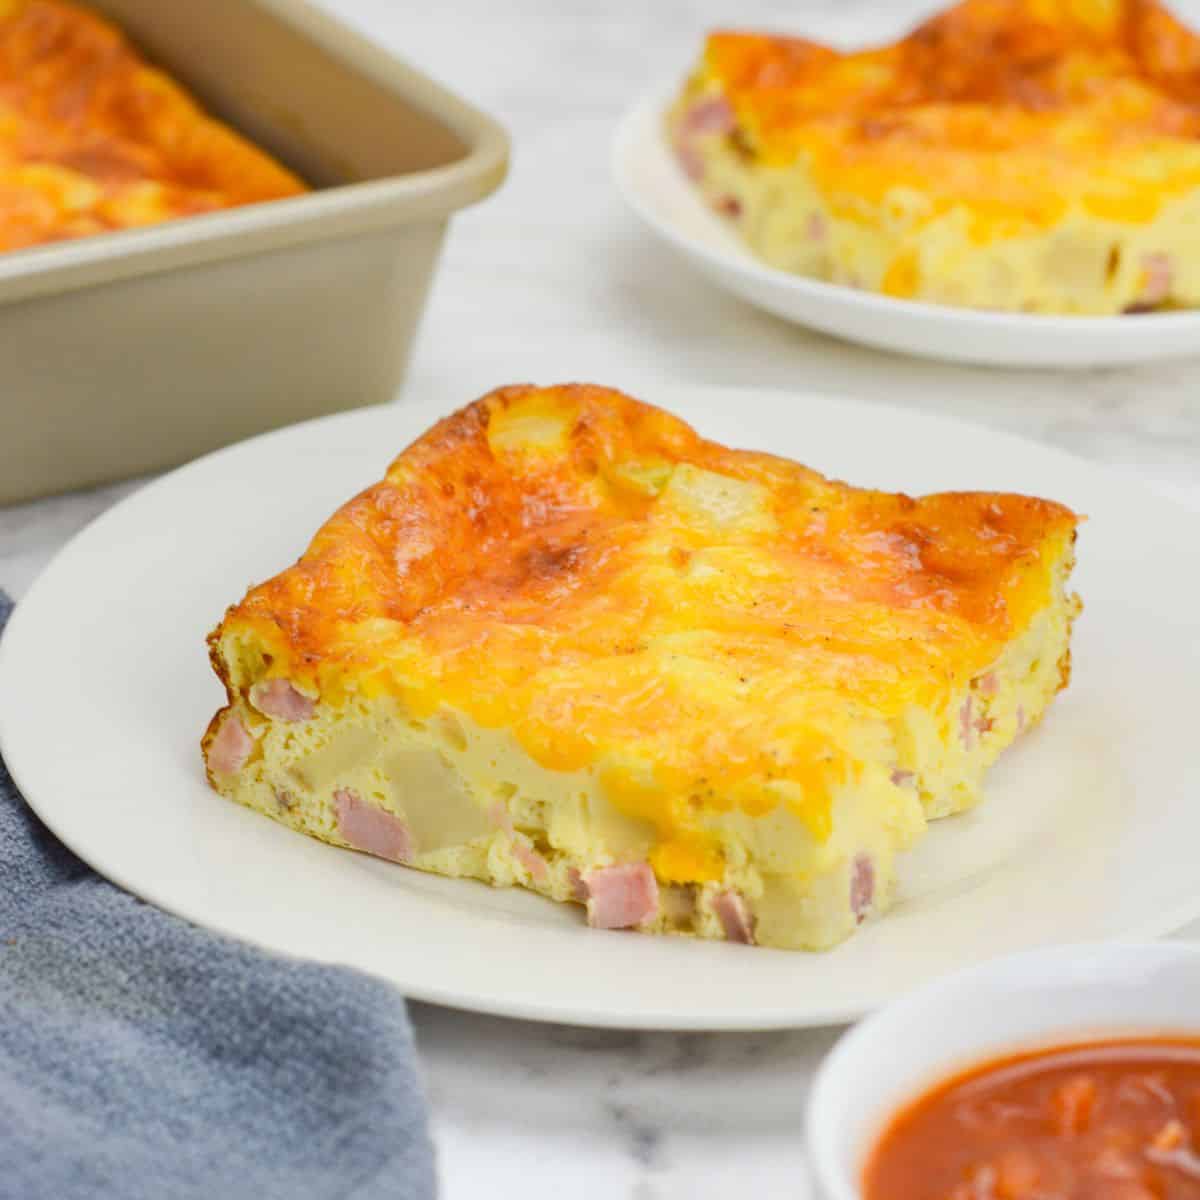 A slice of baked weight watchers breakfast casserole sits on a white plate. To the side is a small plate with a single slice, the baking pan, a gray napkin and a small bowl of salsa 